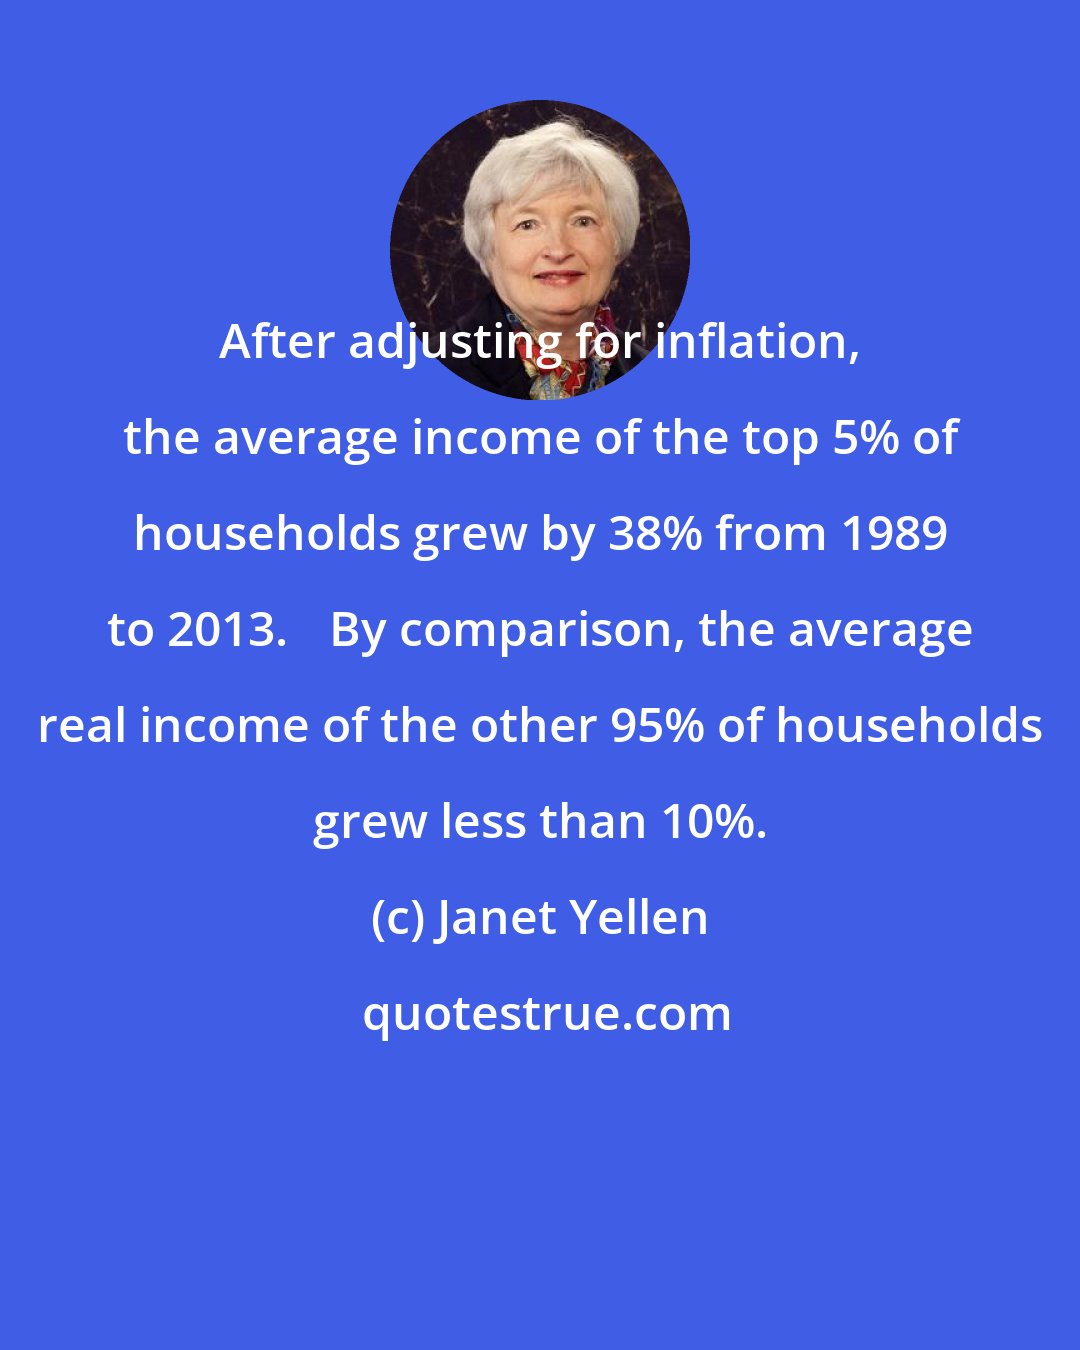 Janet Yellen: After adjusting for inflation, the average income of the top 5% of households grew by 38% from 1989 to 2013. By comparison, the average real income of the other 95% of households grew less than 10%.